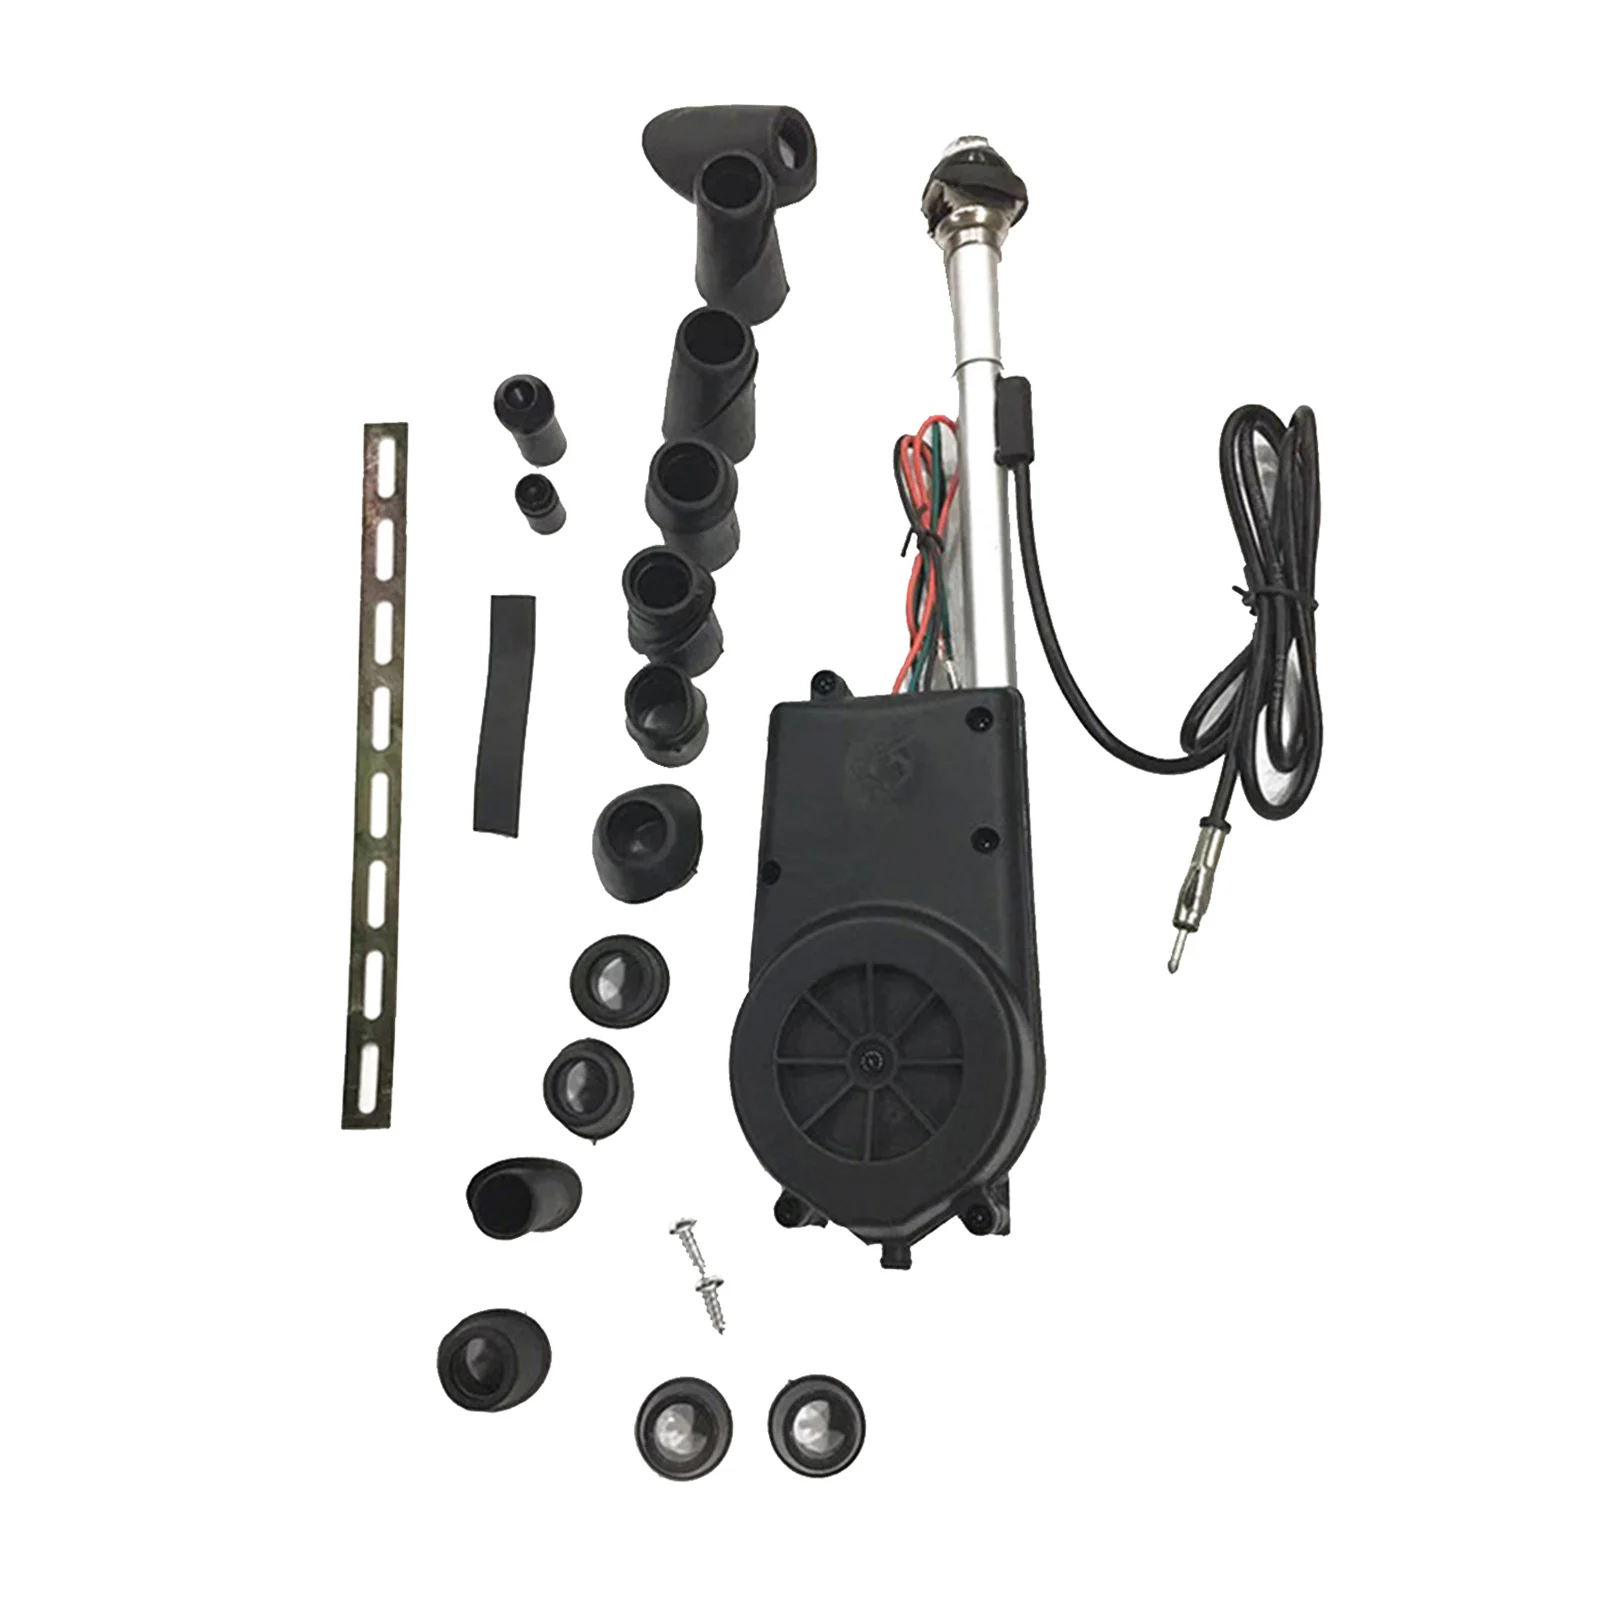 12V Car Electric Power Automatic Antenna Aerial Assembly Kit for AM/FM Radio, Powerful